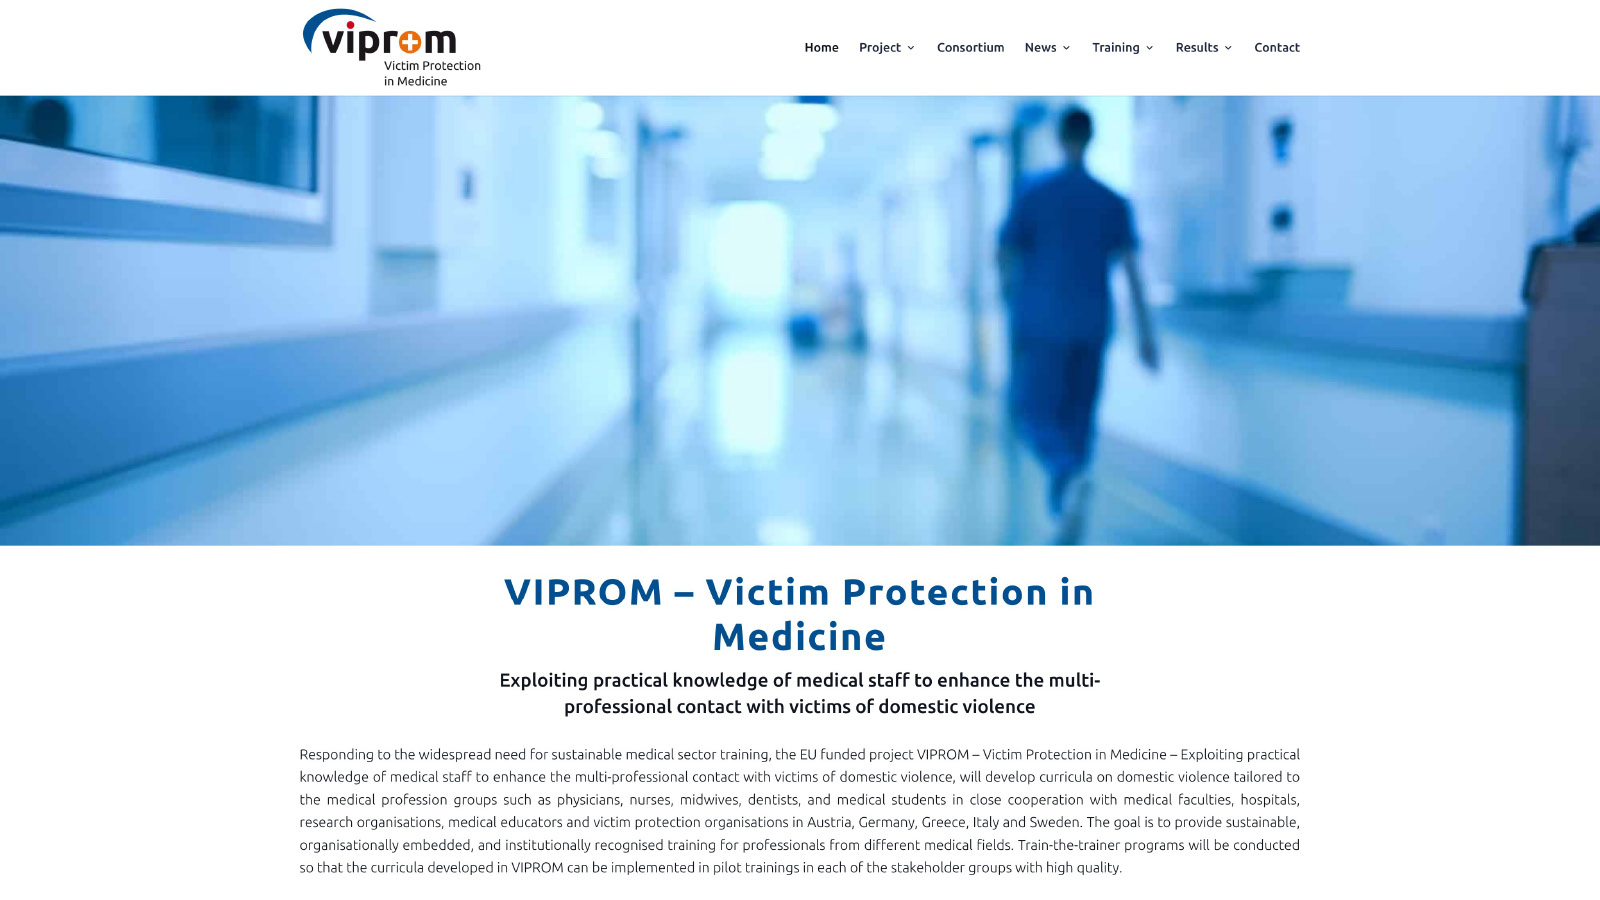 Launch of the VIPROM webpage!